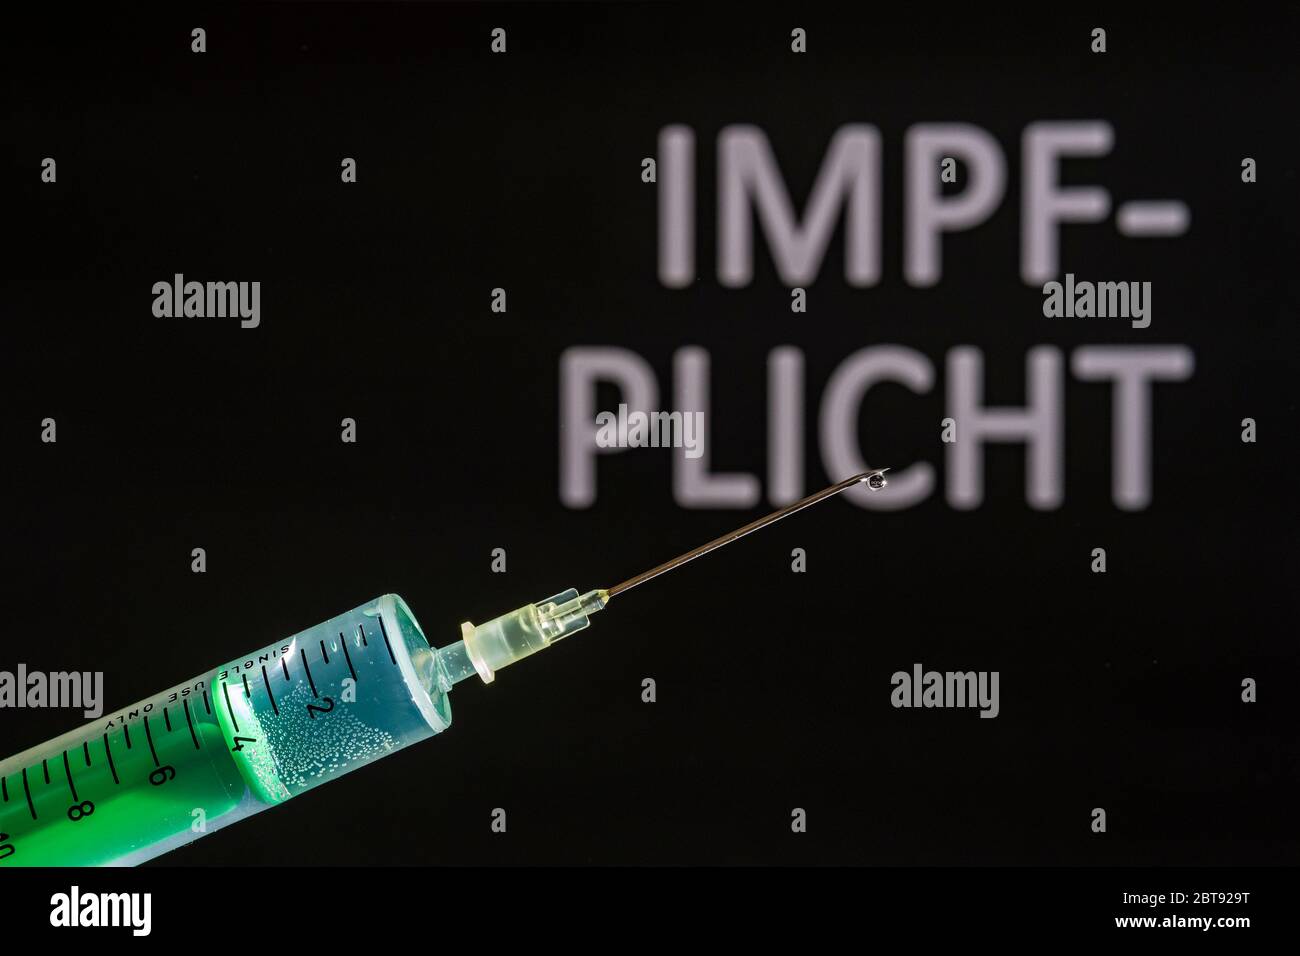 This photo illustration shows a disposable syringe with hypodermic needle, IMPFPLICHT written on a black board behind Stock Photo